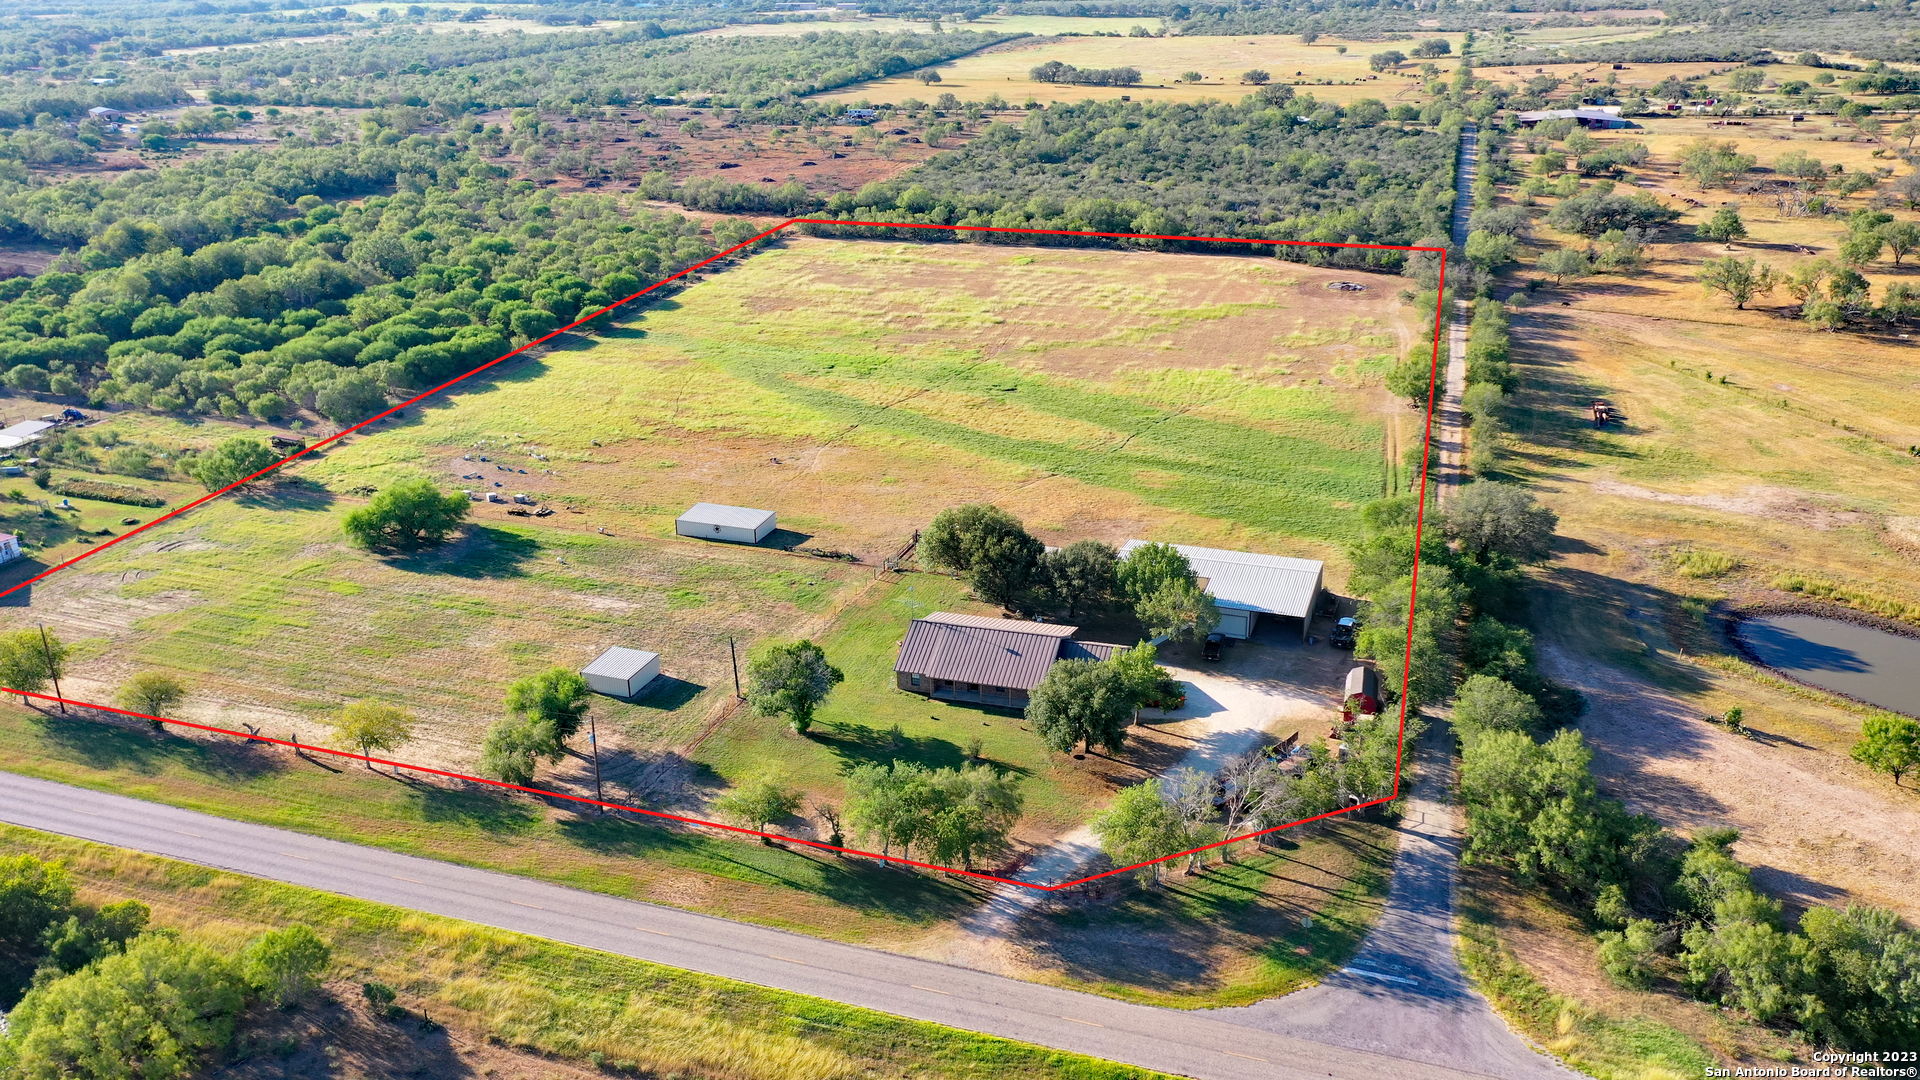 Built in 2001, this three bedroom / two bath ranch style home sits on 11.4 acres, just west of Yancey, Texas.  The 2,636-sf home has a masonry/Hardie exterior, standing seam metal roof, and an attached two car carport.  The interior of the home features an open concept kitchen/dining/living area, master-suite, study, two additional bedrooms w/shared bath, and a laundry/mud room.  Additionally, the home has large porches, front and back, with a surrounding of mature shade trees.